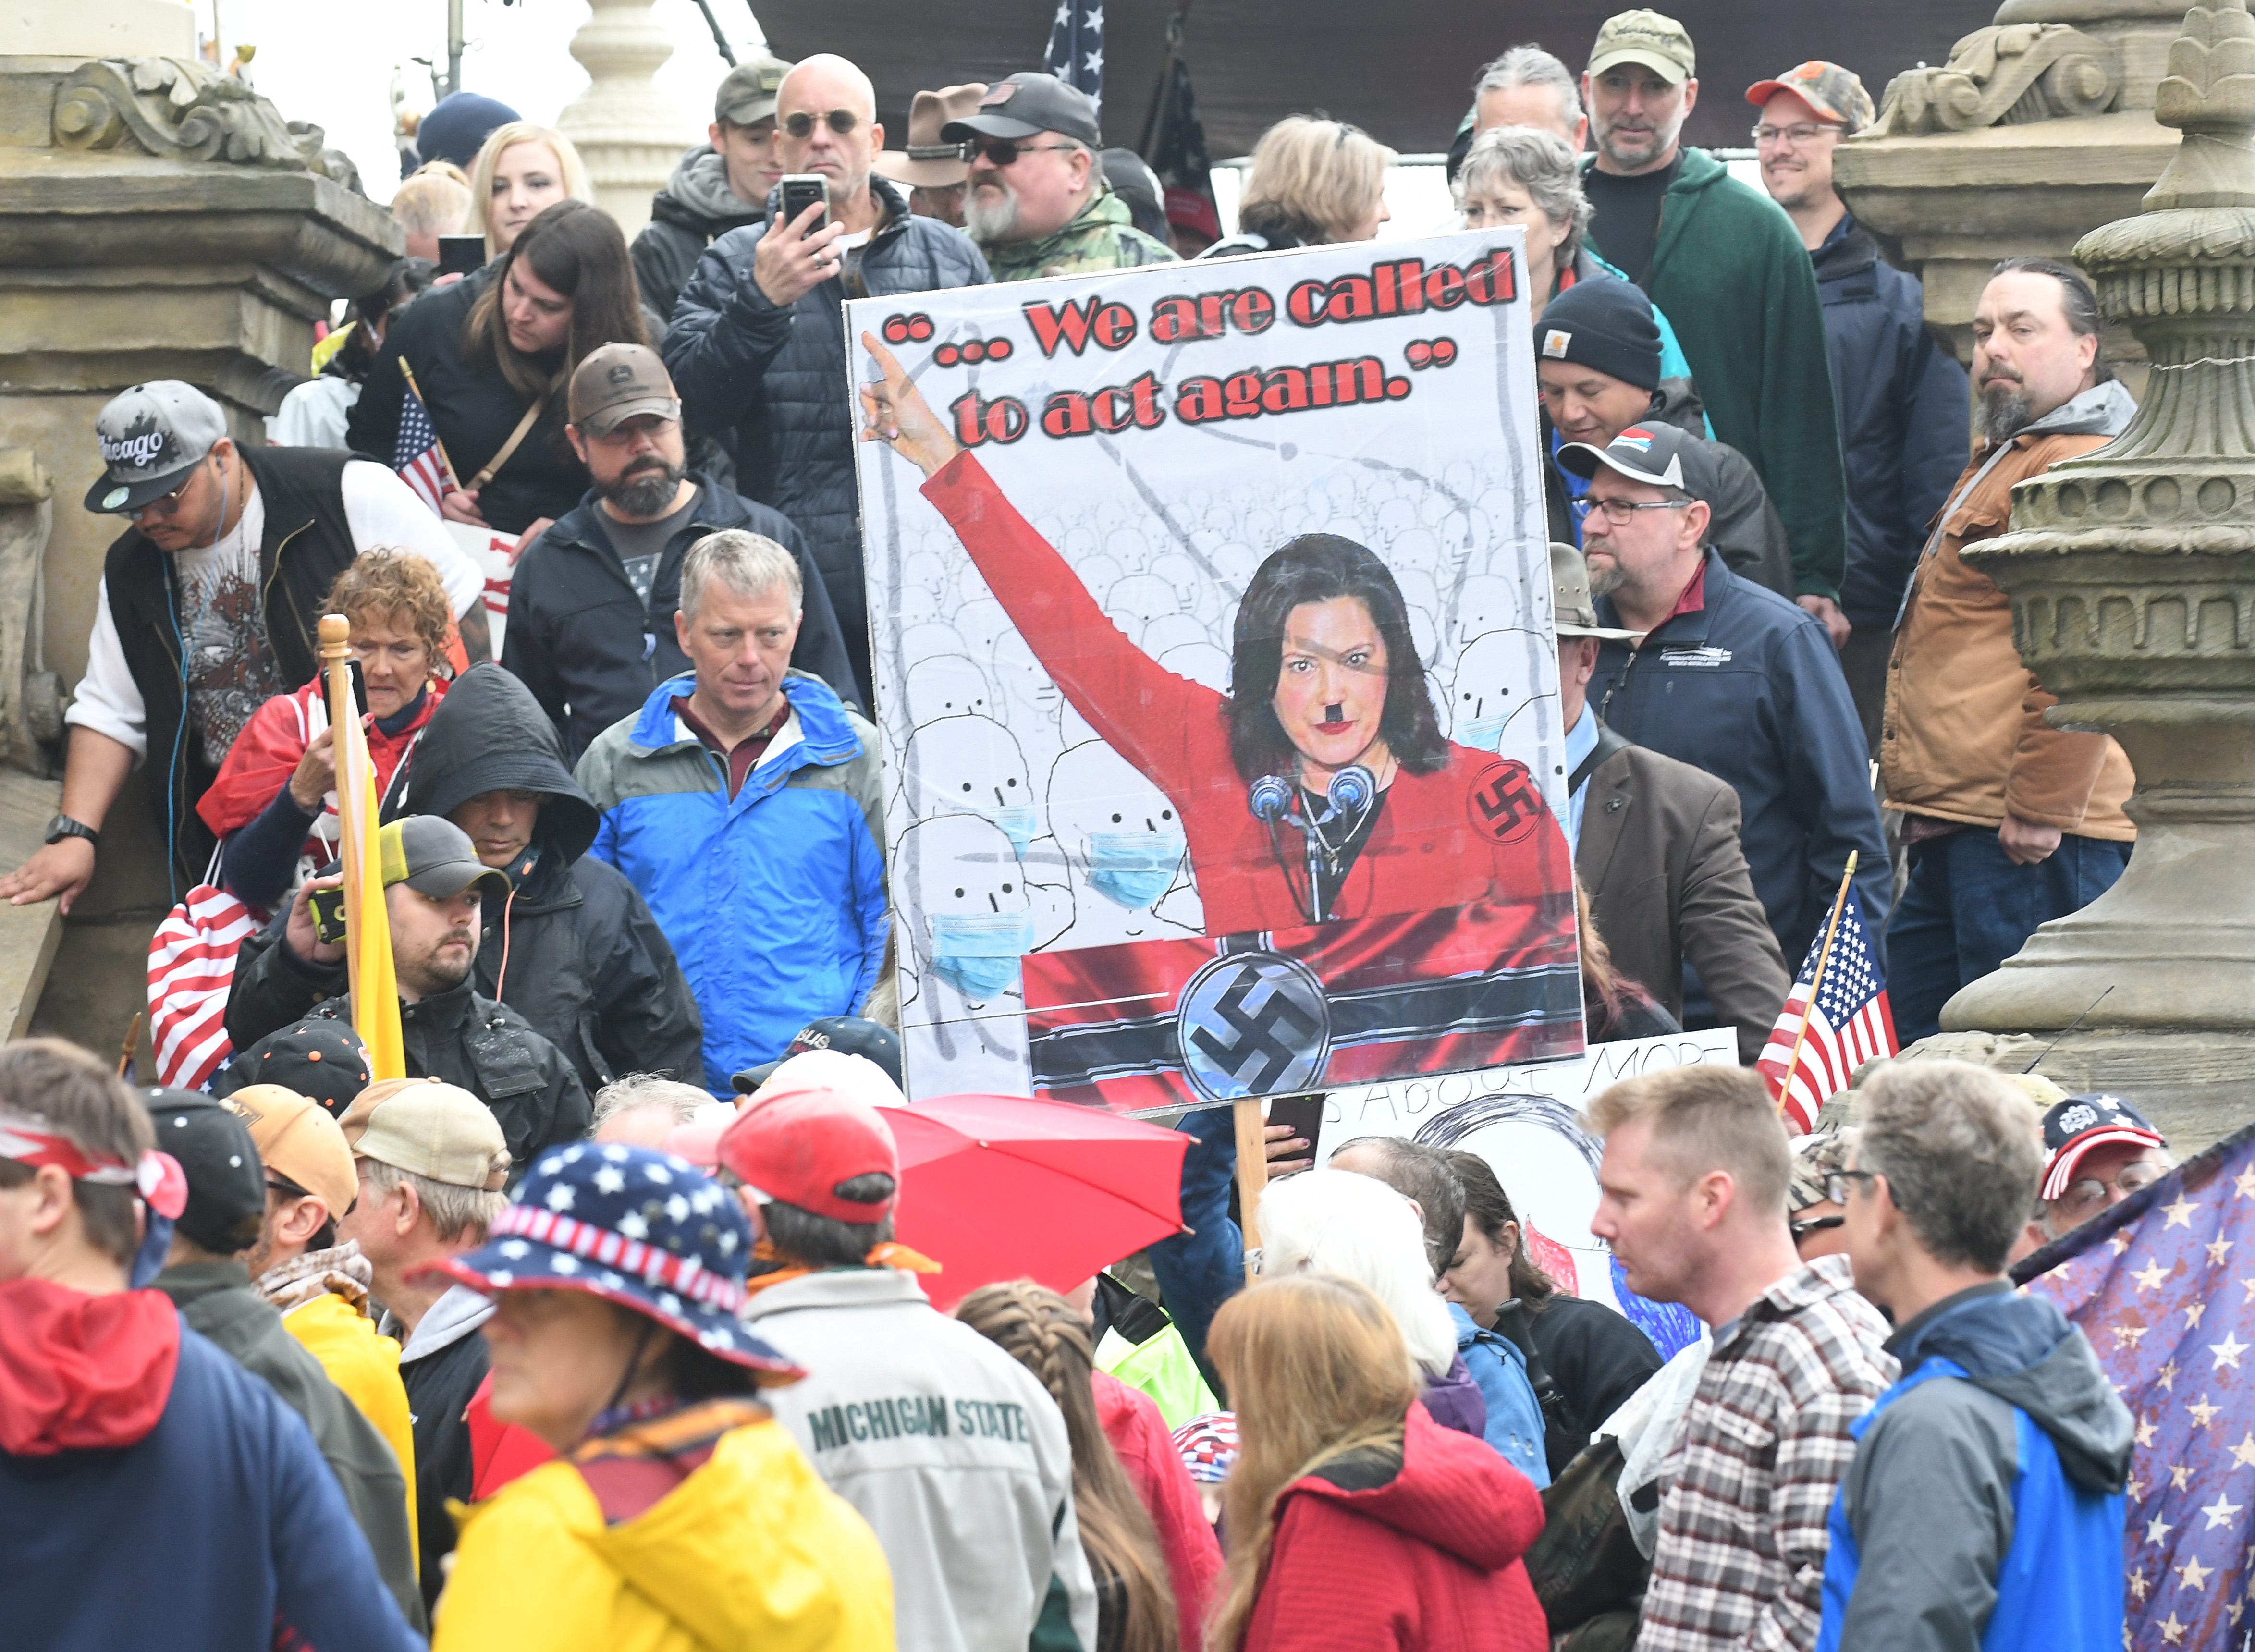 Protesters make their way down the steps of the Michigan Capitol after the " American Patriot Rally " in Lansing on April 30, 2020.